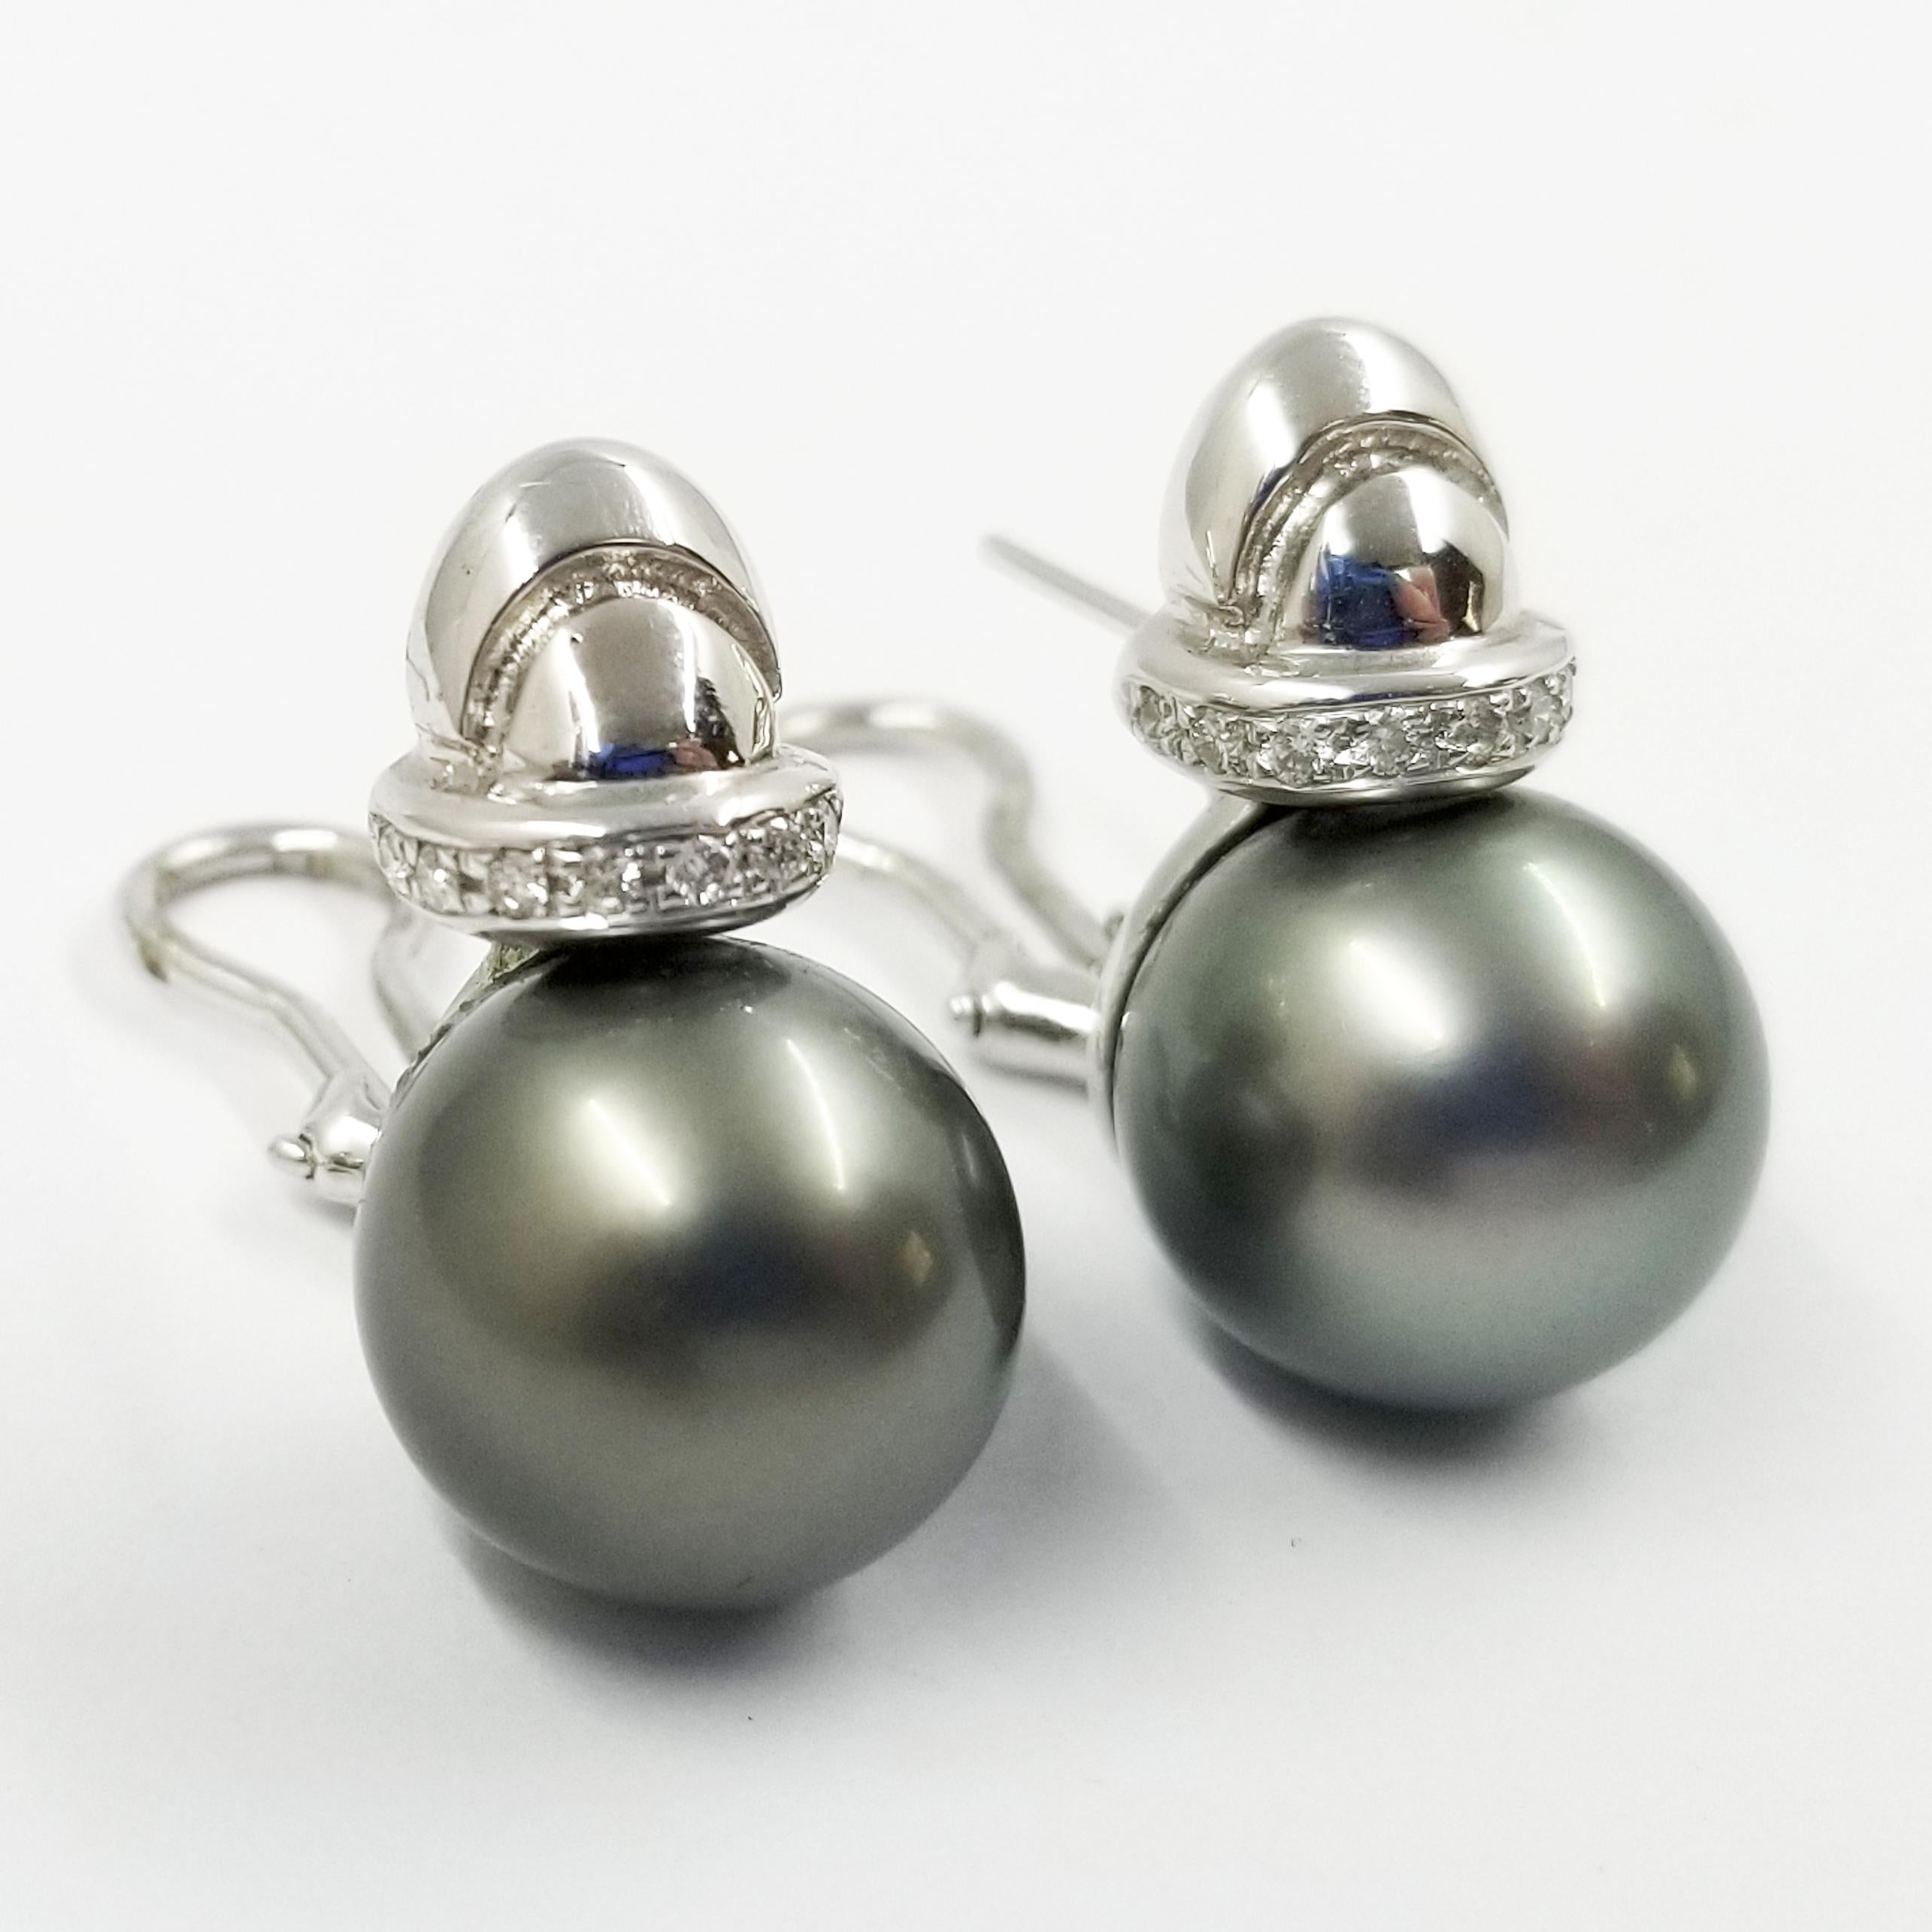 14 Karat White Gold Cultured Pearl Earrings Featuring a Pair of 13.5mm Gray South Sea Pearls & 18 Round Diamonds Totaling Approximately 0.24 Carats. The Attachment is a Pierced Post with Omega Clip Back for Extra Support.